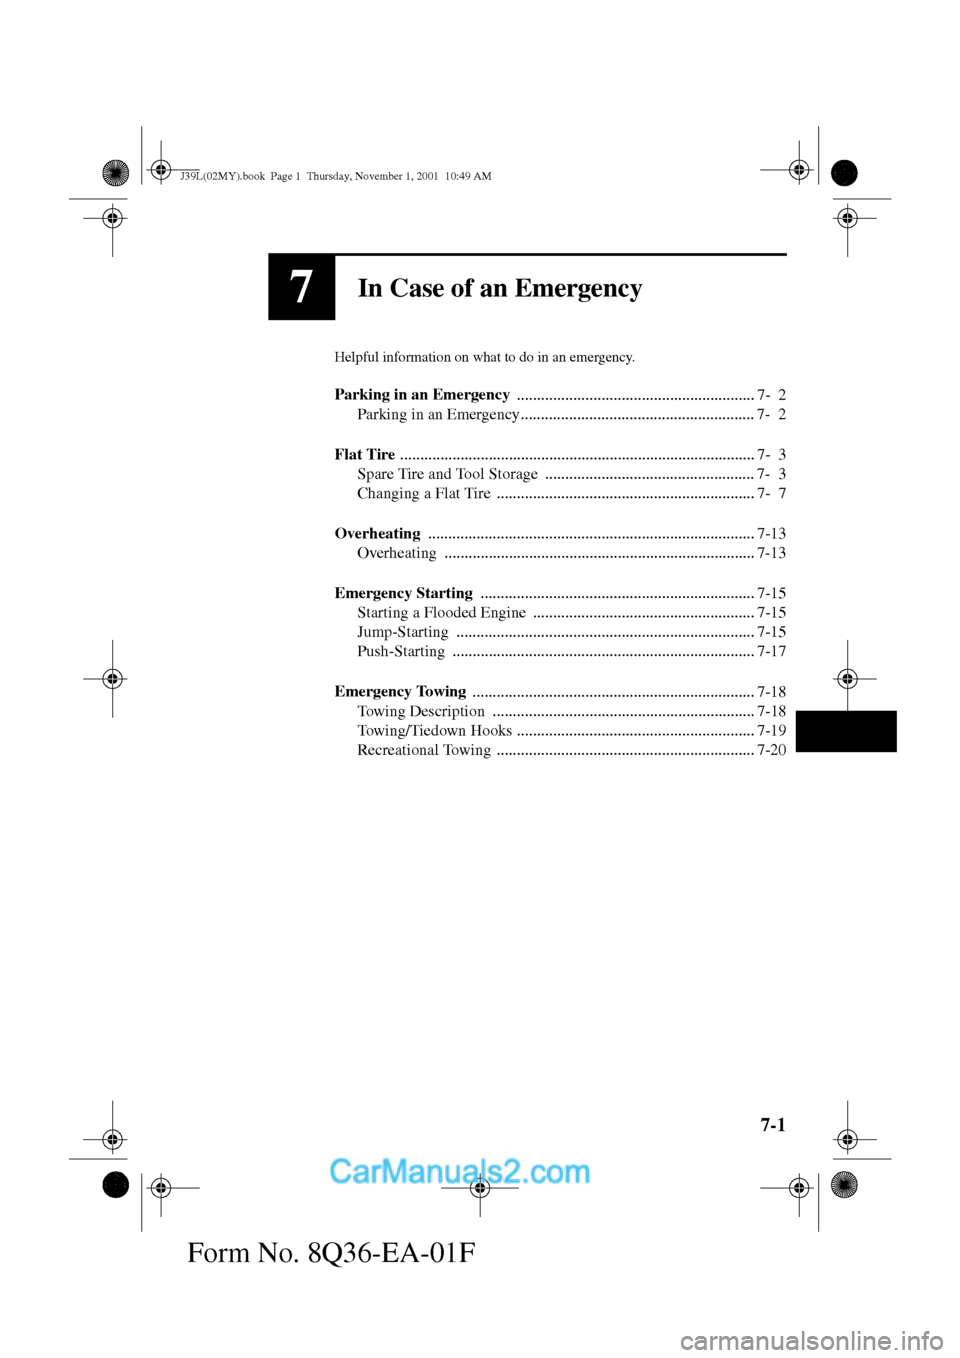 MAZDA MODEL PROTÉGÉ 2002  Owners Manual (in English) 7-1
Form No. 8Q36-EA-01F
7In Case of an Emergency
Helpful information on what to do in an emergency.
Parking in an Emergency 
........................................................... 7- 2
Parking i